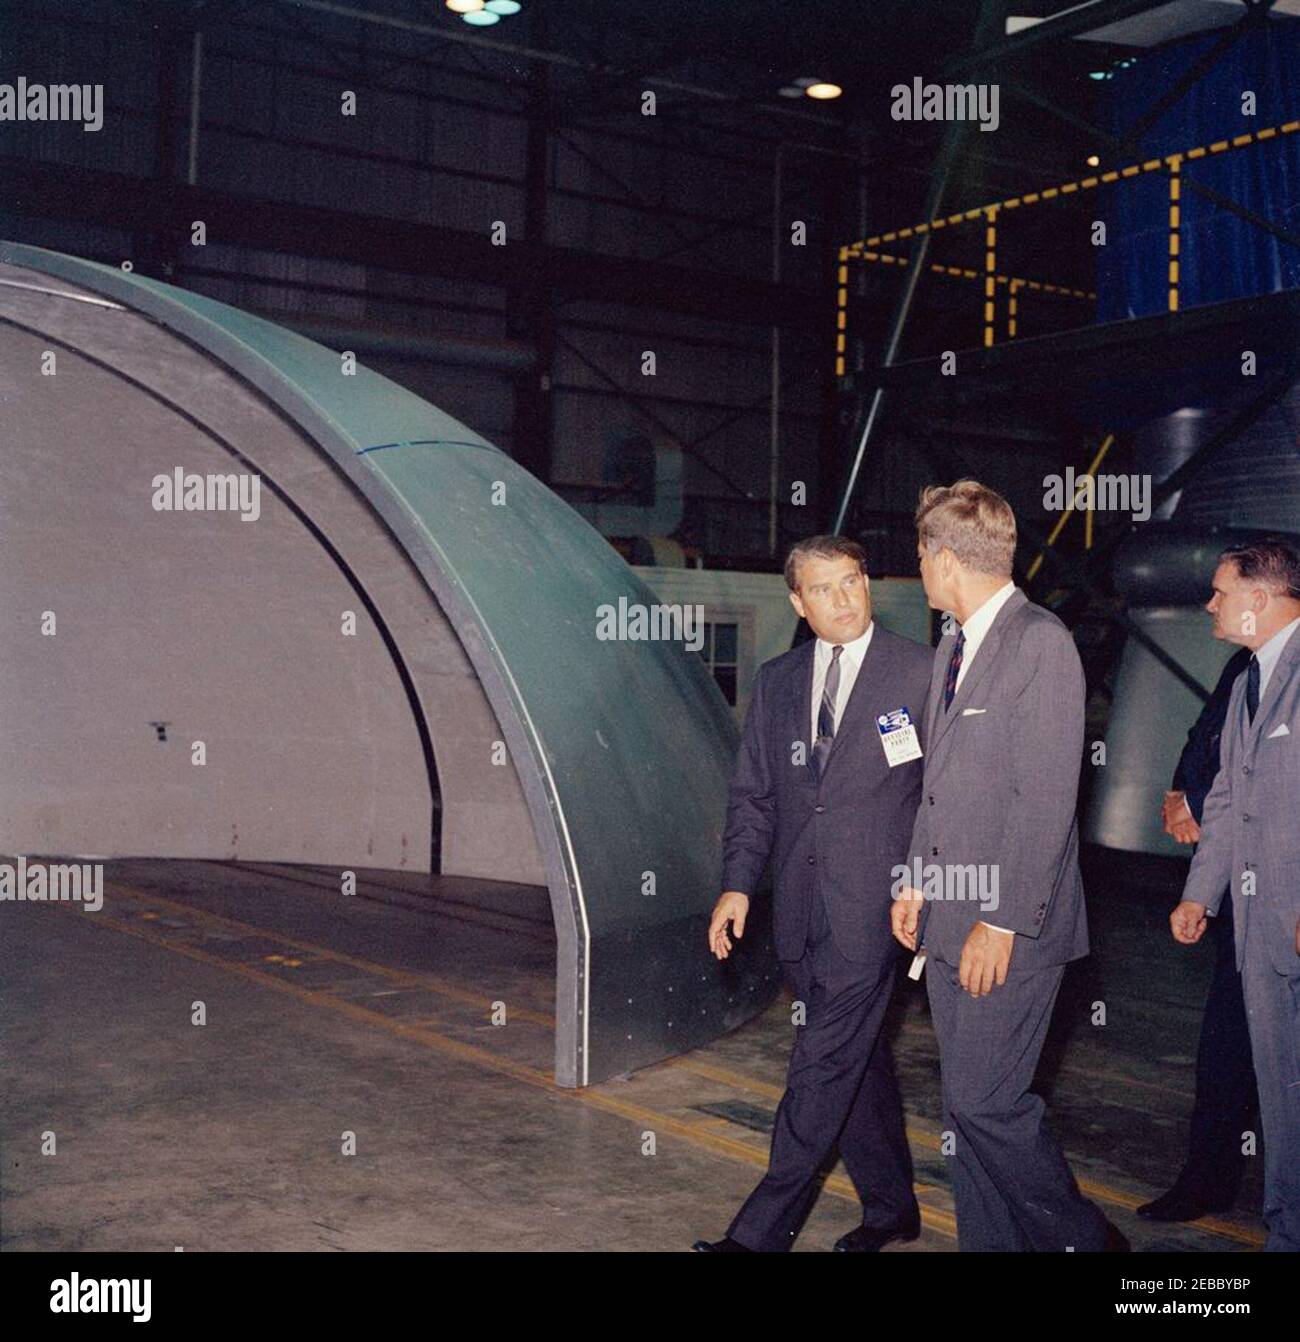 Inspection tour of NASA installations: Huntsville Alabama, Redstone Army Airfield and George C. Marshall Space Flight Center, 9:35AM. President John F. Kennedy tours the George C. Marshall Space Flight Center (MSFC) at Redstone Arsenal, Huntsville, Alabama. Left to right: Director of the MSFC, Dr. Wernher von Braun; President Kennedy; Administrator of the National Aeronautics and Space Administration (NASA), Dr. James E. Webb. The President visited the MSFC as part of a two-day inspection tour of NASA field installations. Stock Photo